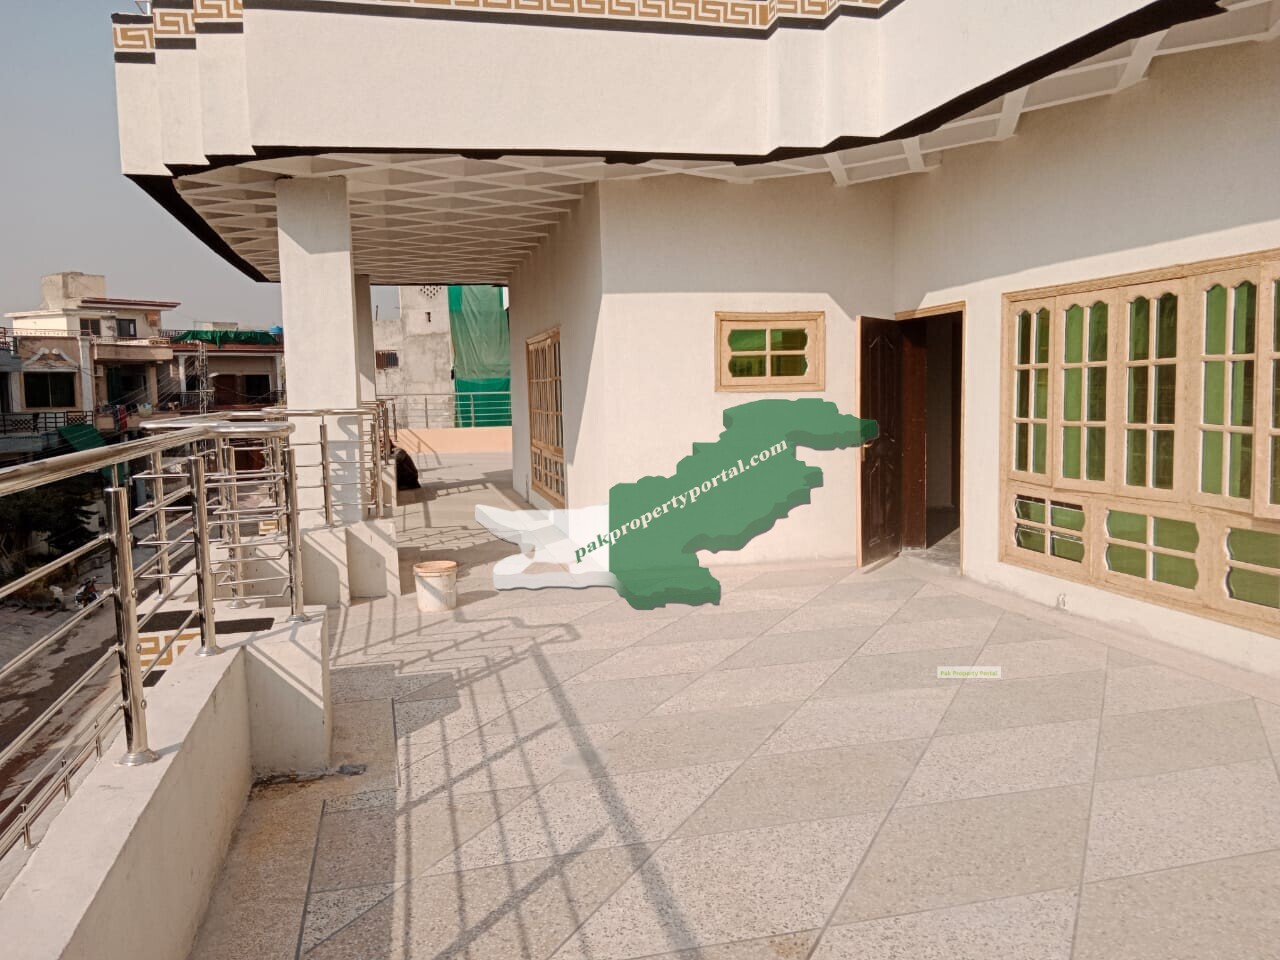 25 Marla Tripple storey House for sale at Airport housing society sector 01 Islamabad